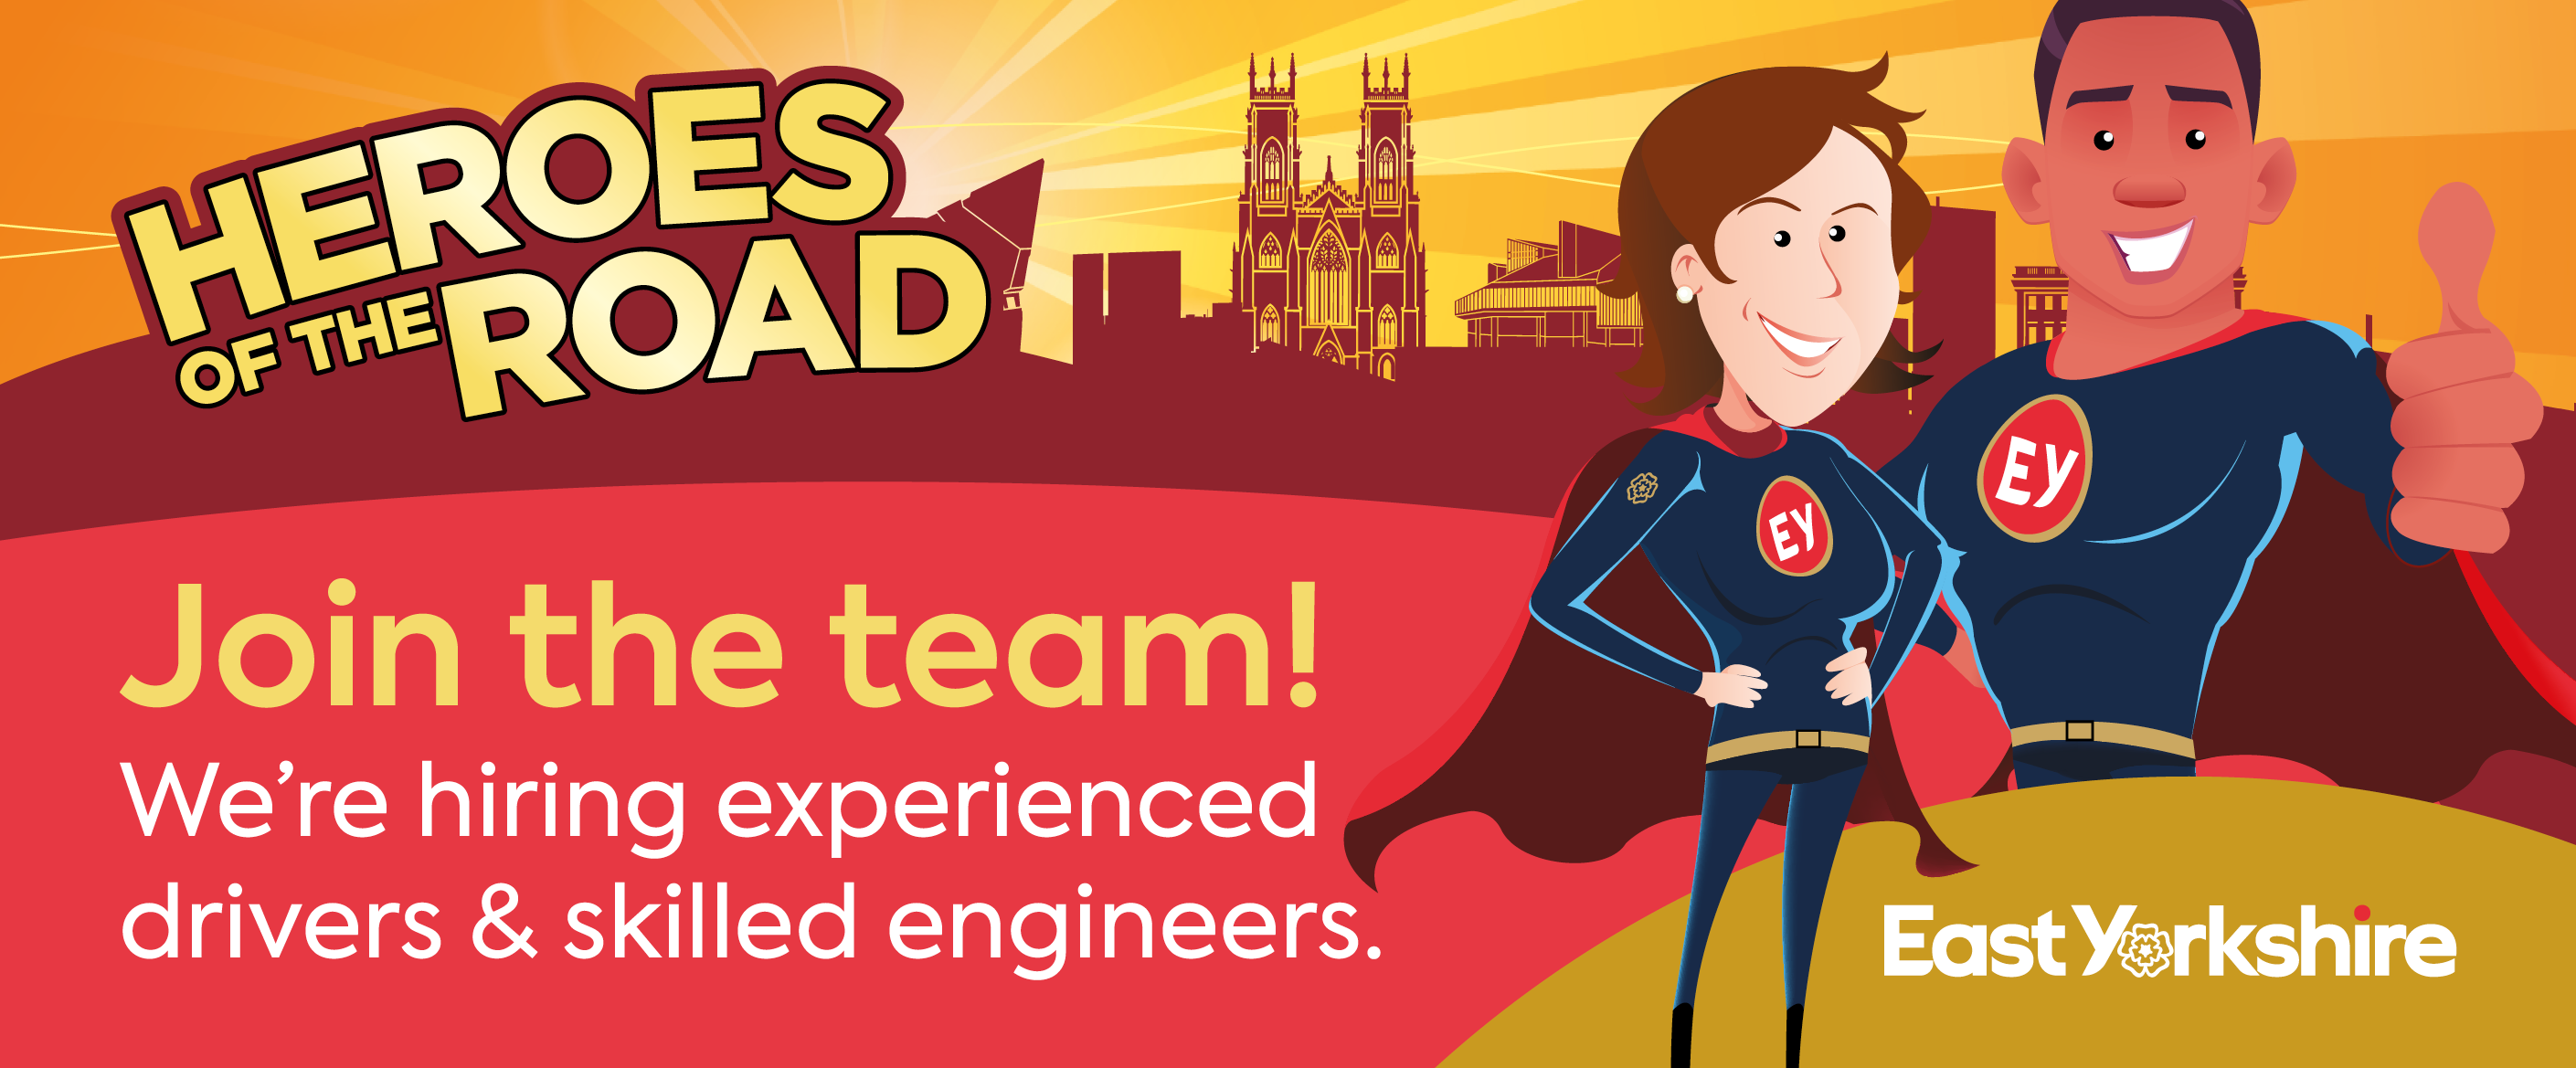 Join the team! We're hiring experienced drivers & skilled engineers.